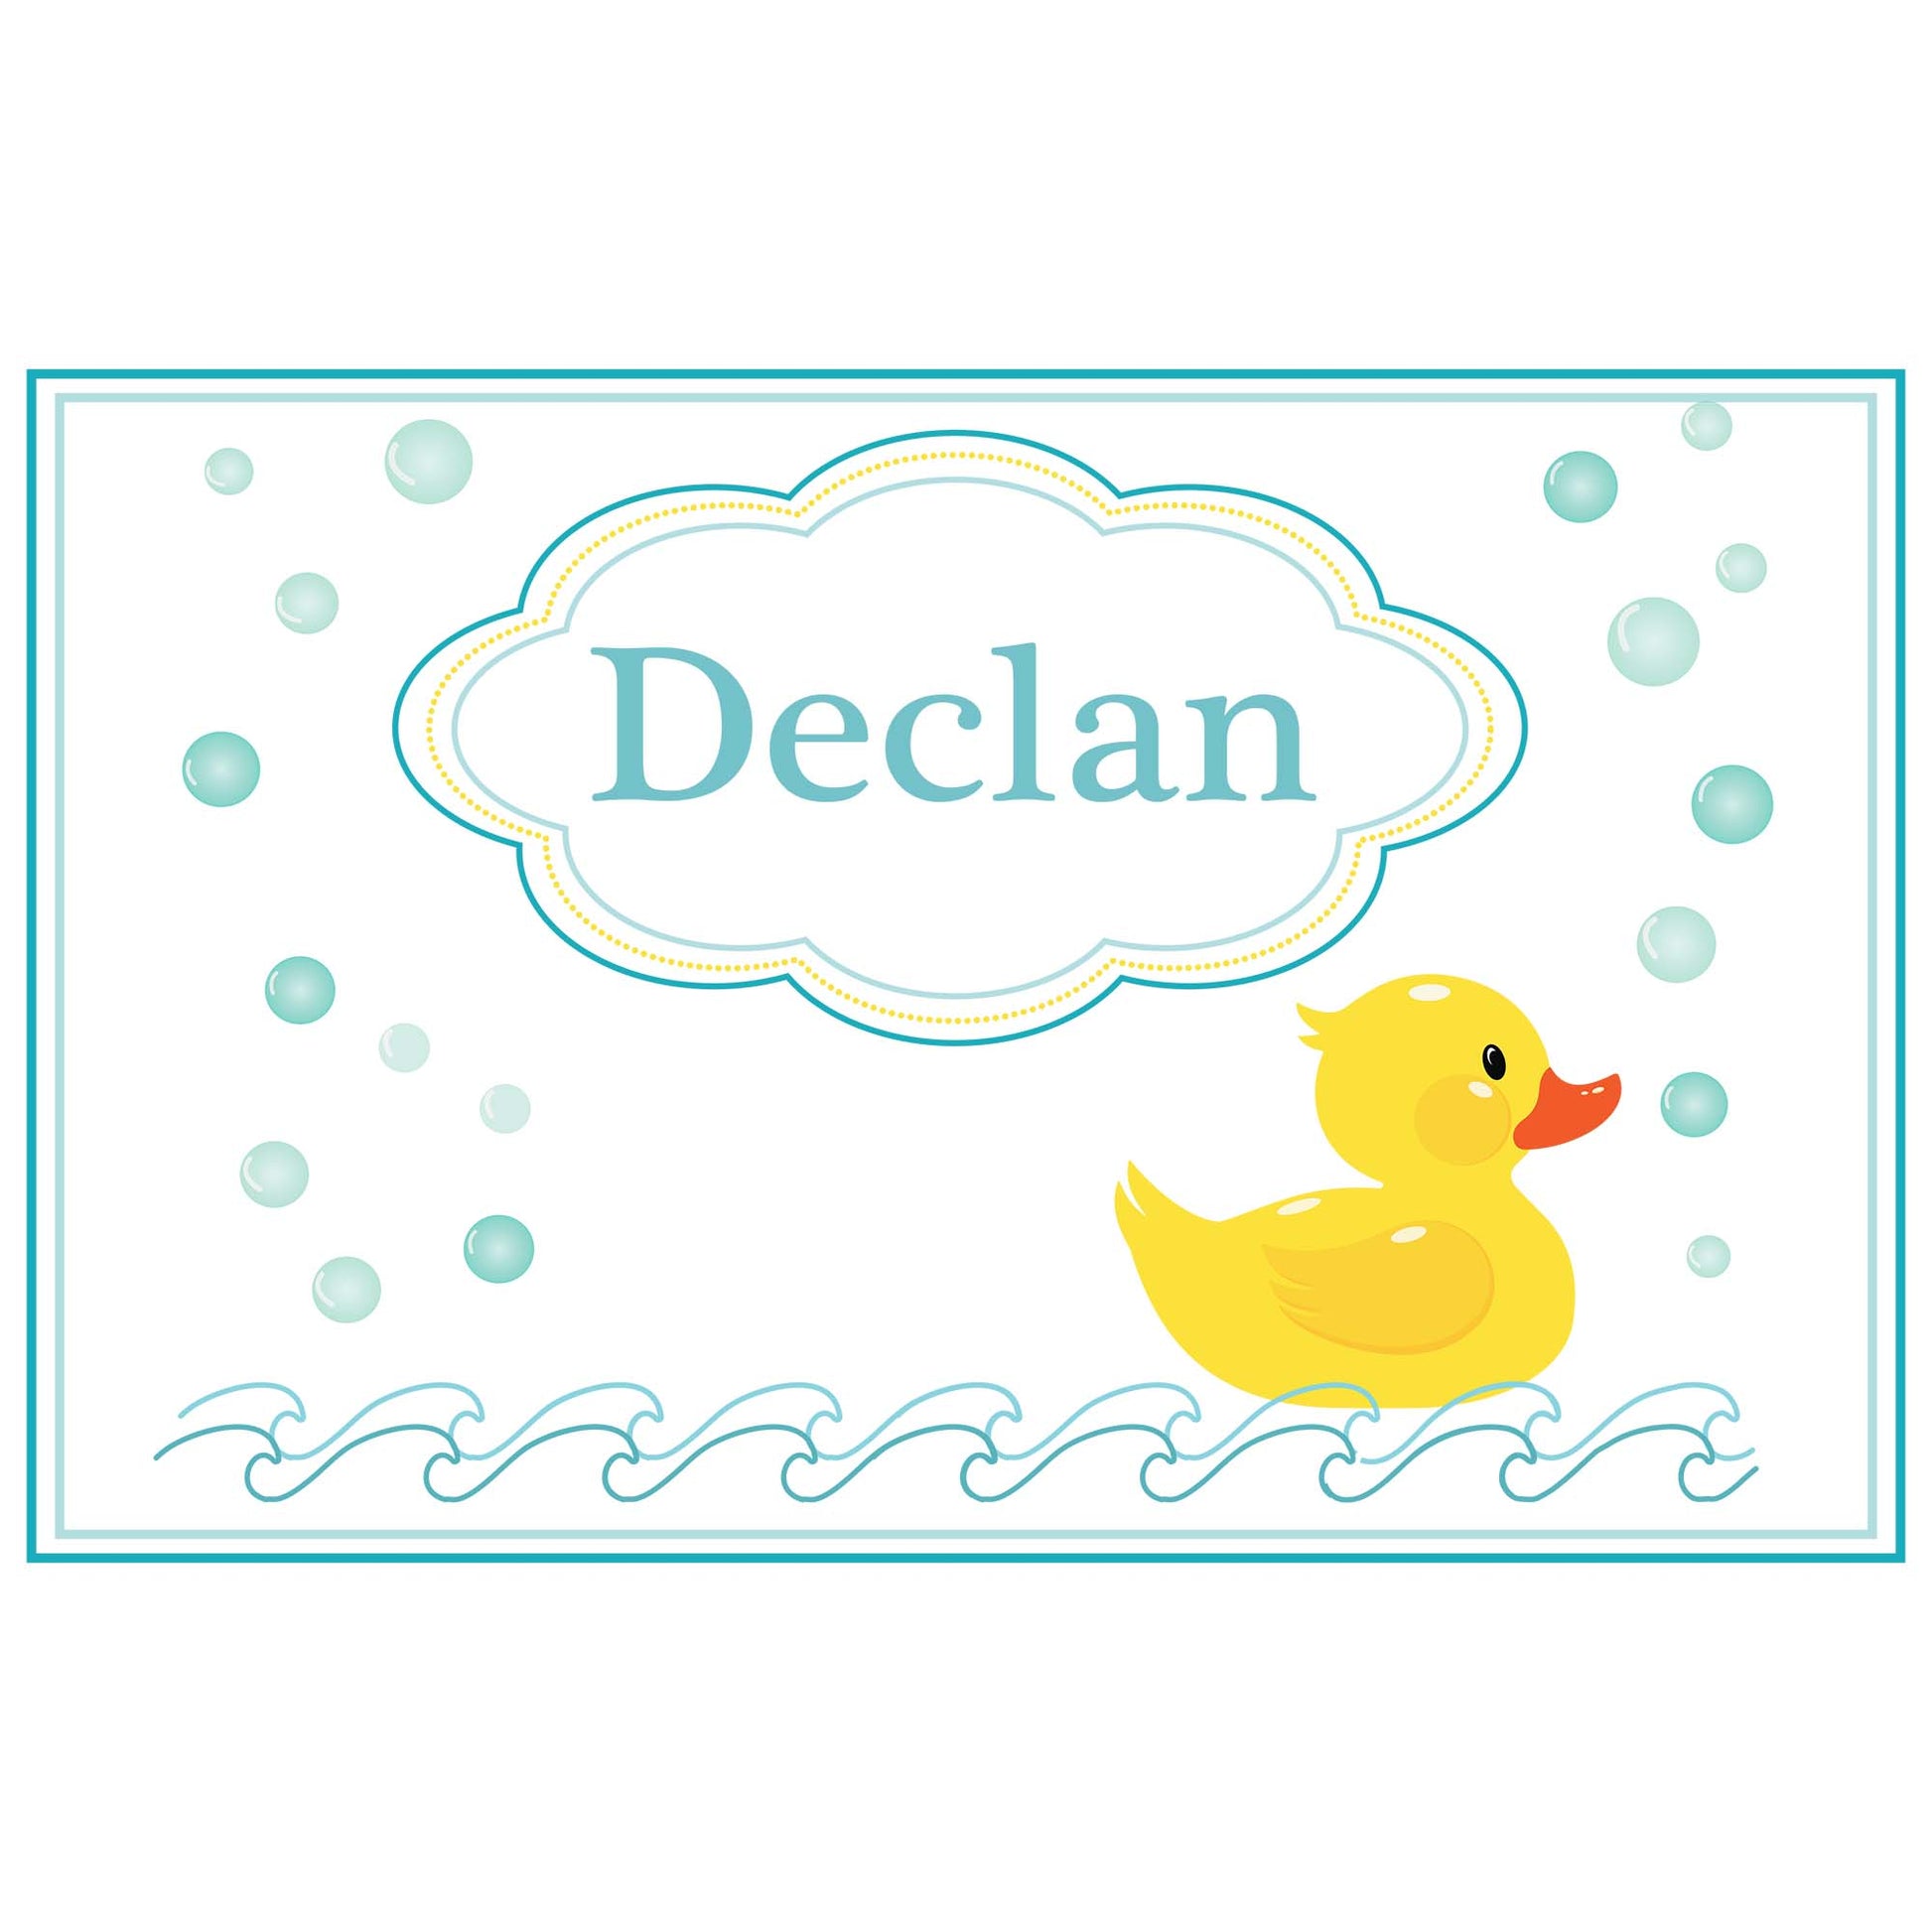 Personalized Placemat with Rubber Ducky design